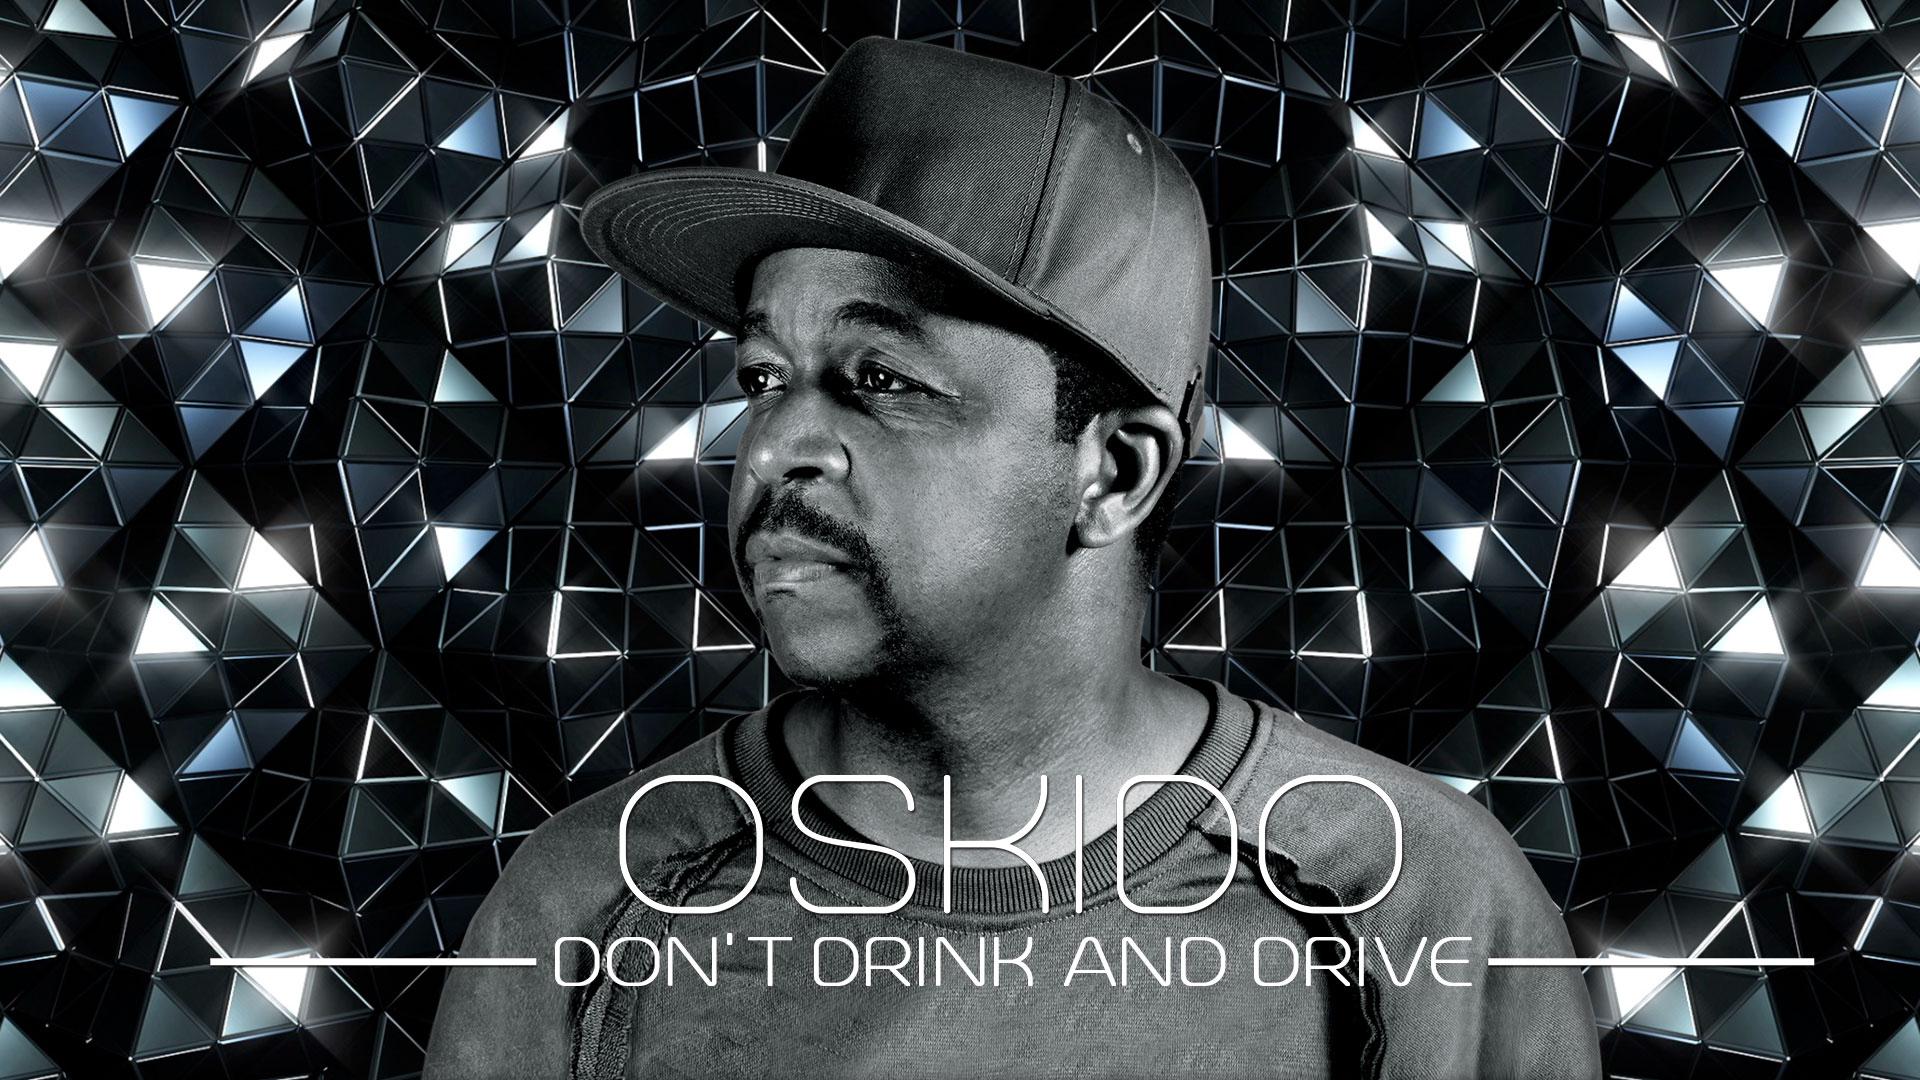 Oskido - Don’t Drink And Drive (Audio)